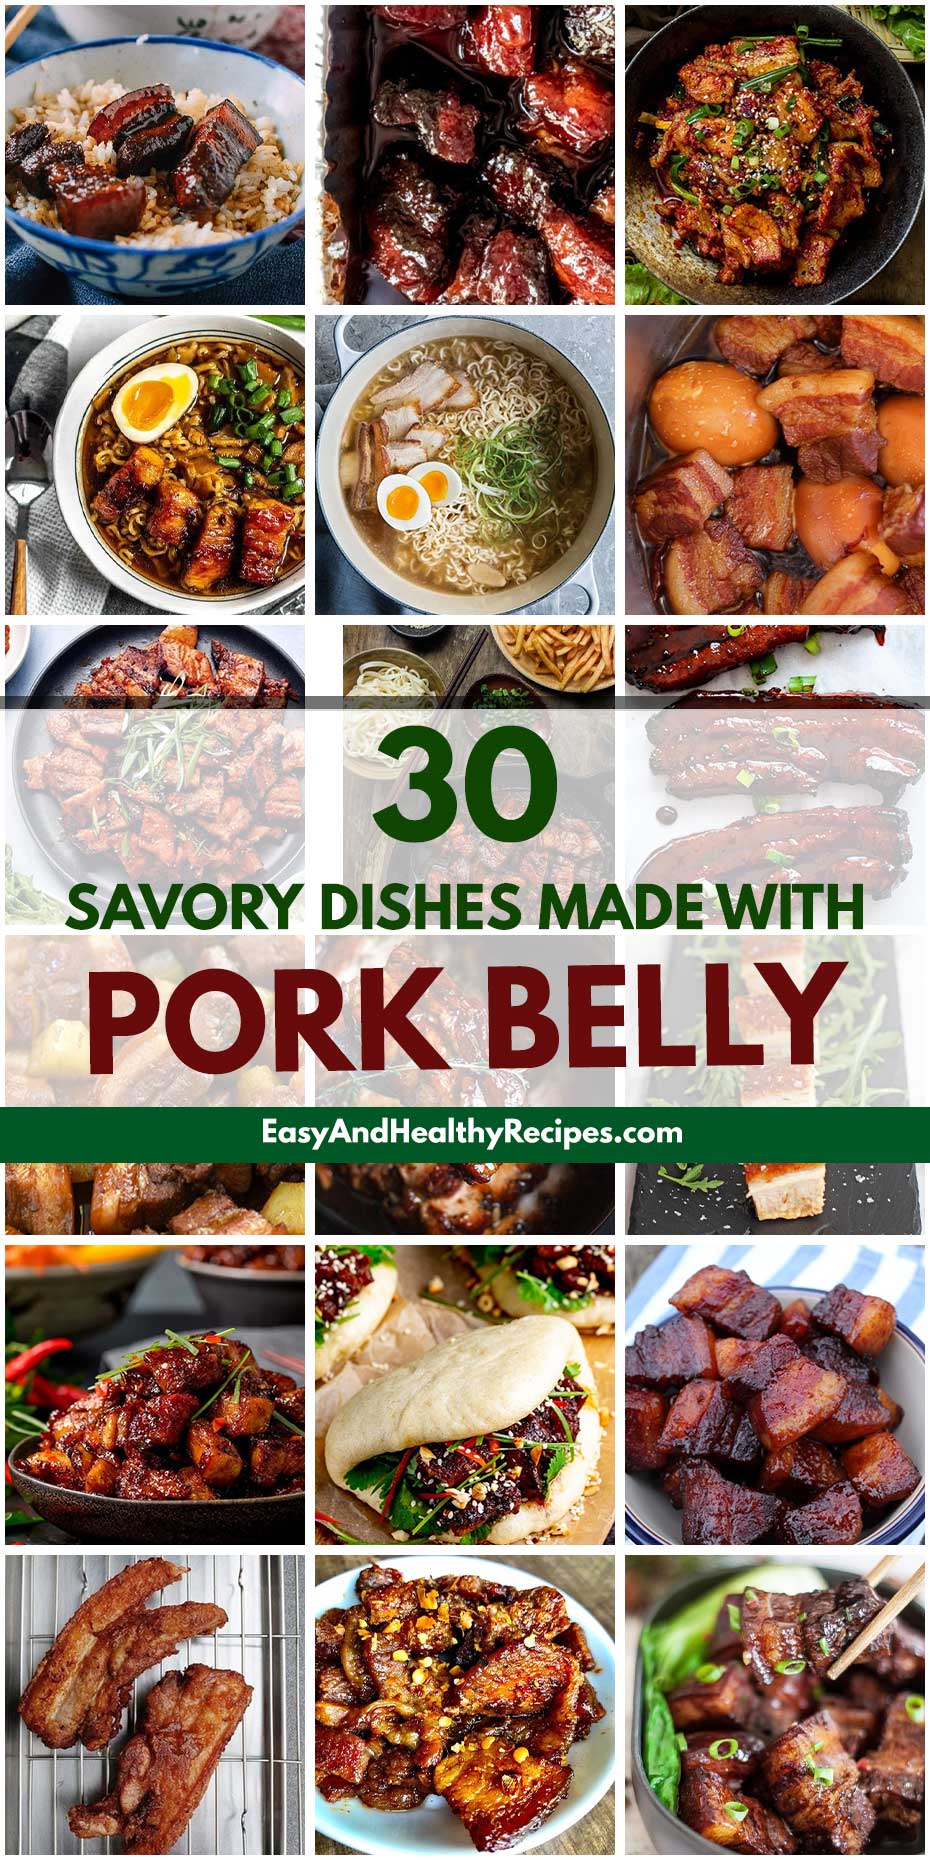 Here Are 30 Savory Dishes To Make with Pork Belly